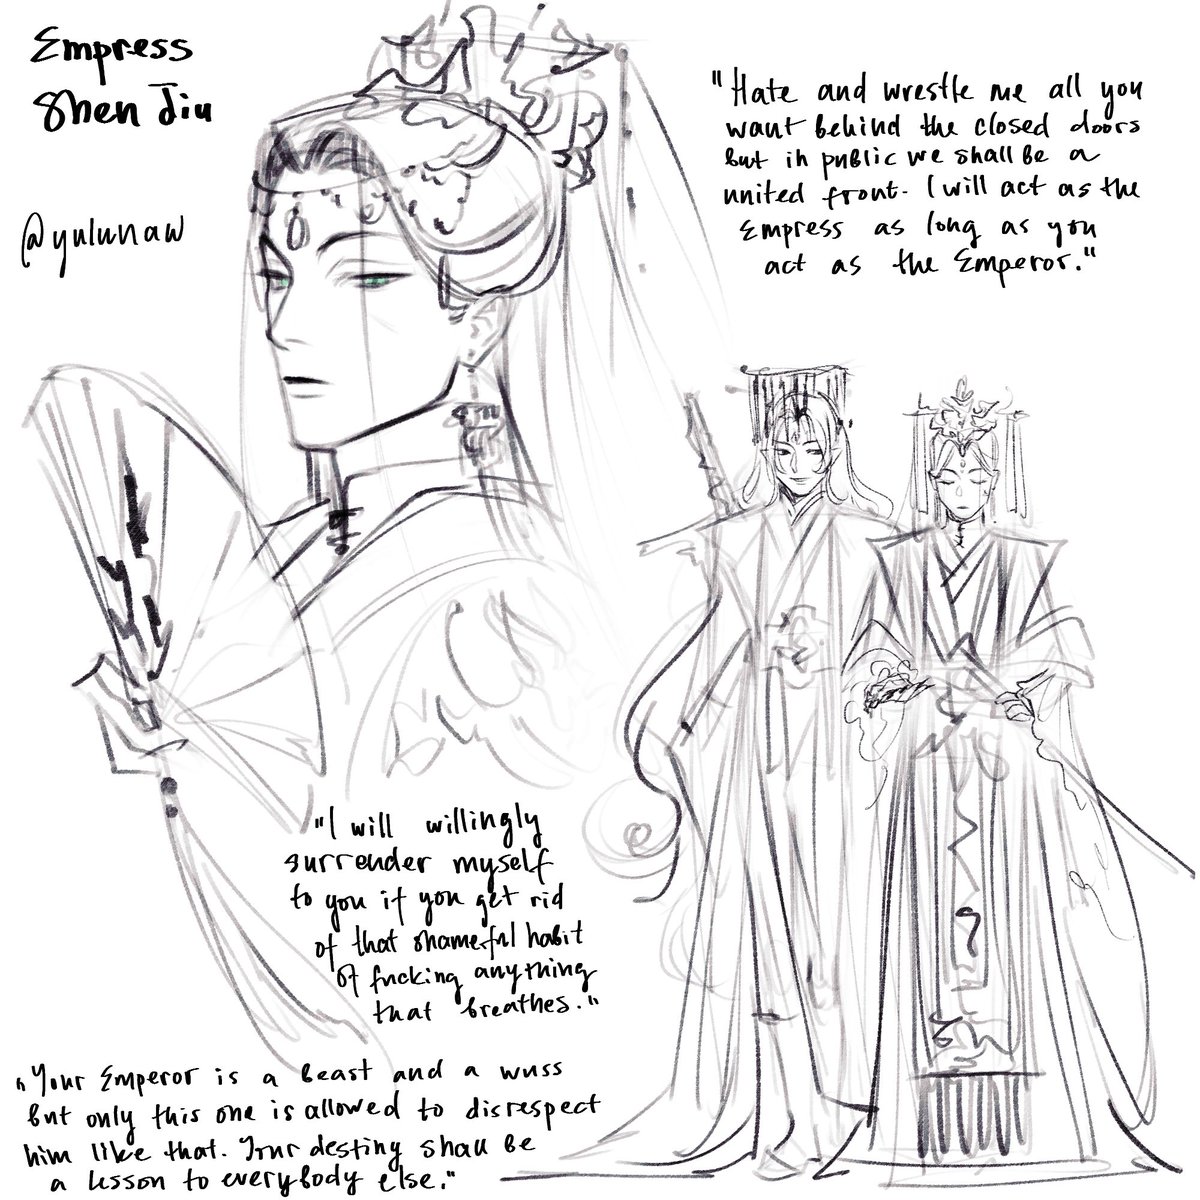 Manifesting bad bitch energy by drawing the baddest bitch there is. Shen Jiu gets married off to Bingge by Cang Qiong. Everyone thinks he is Bingge’s chew toy but he turns out to be an excellent (and ruthless) empress. #bingjiu #svsss